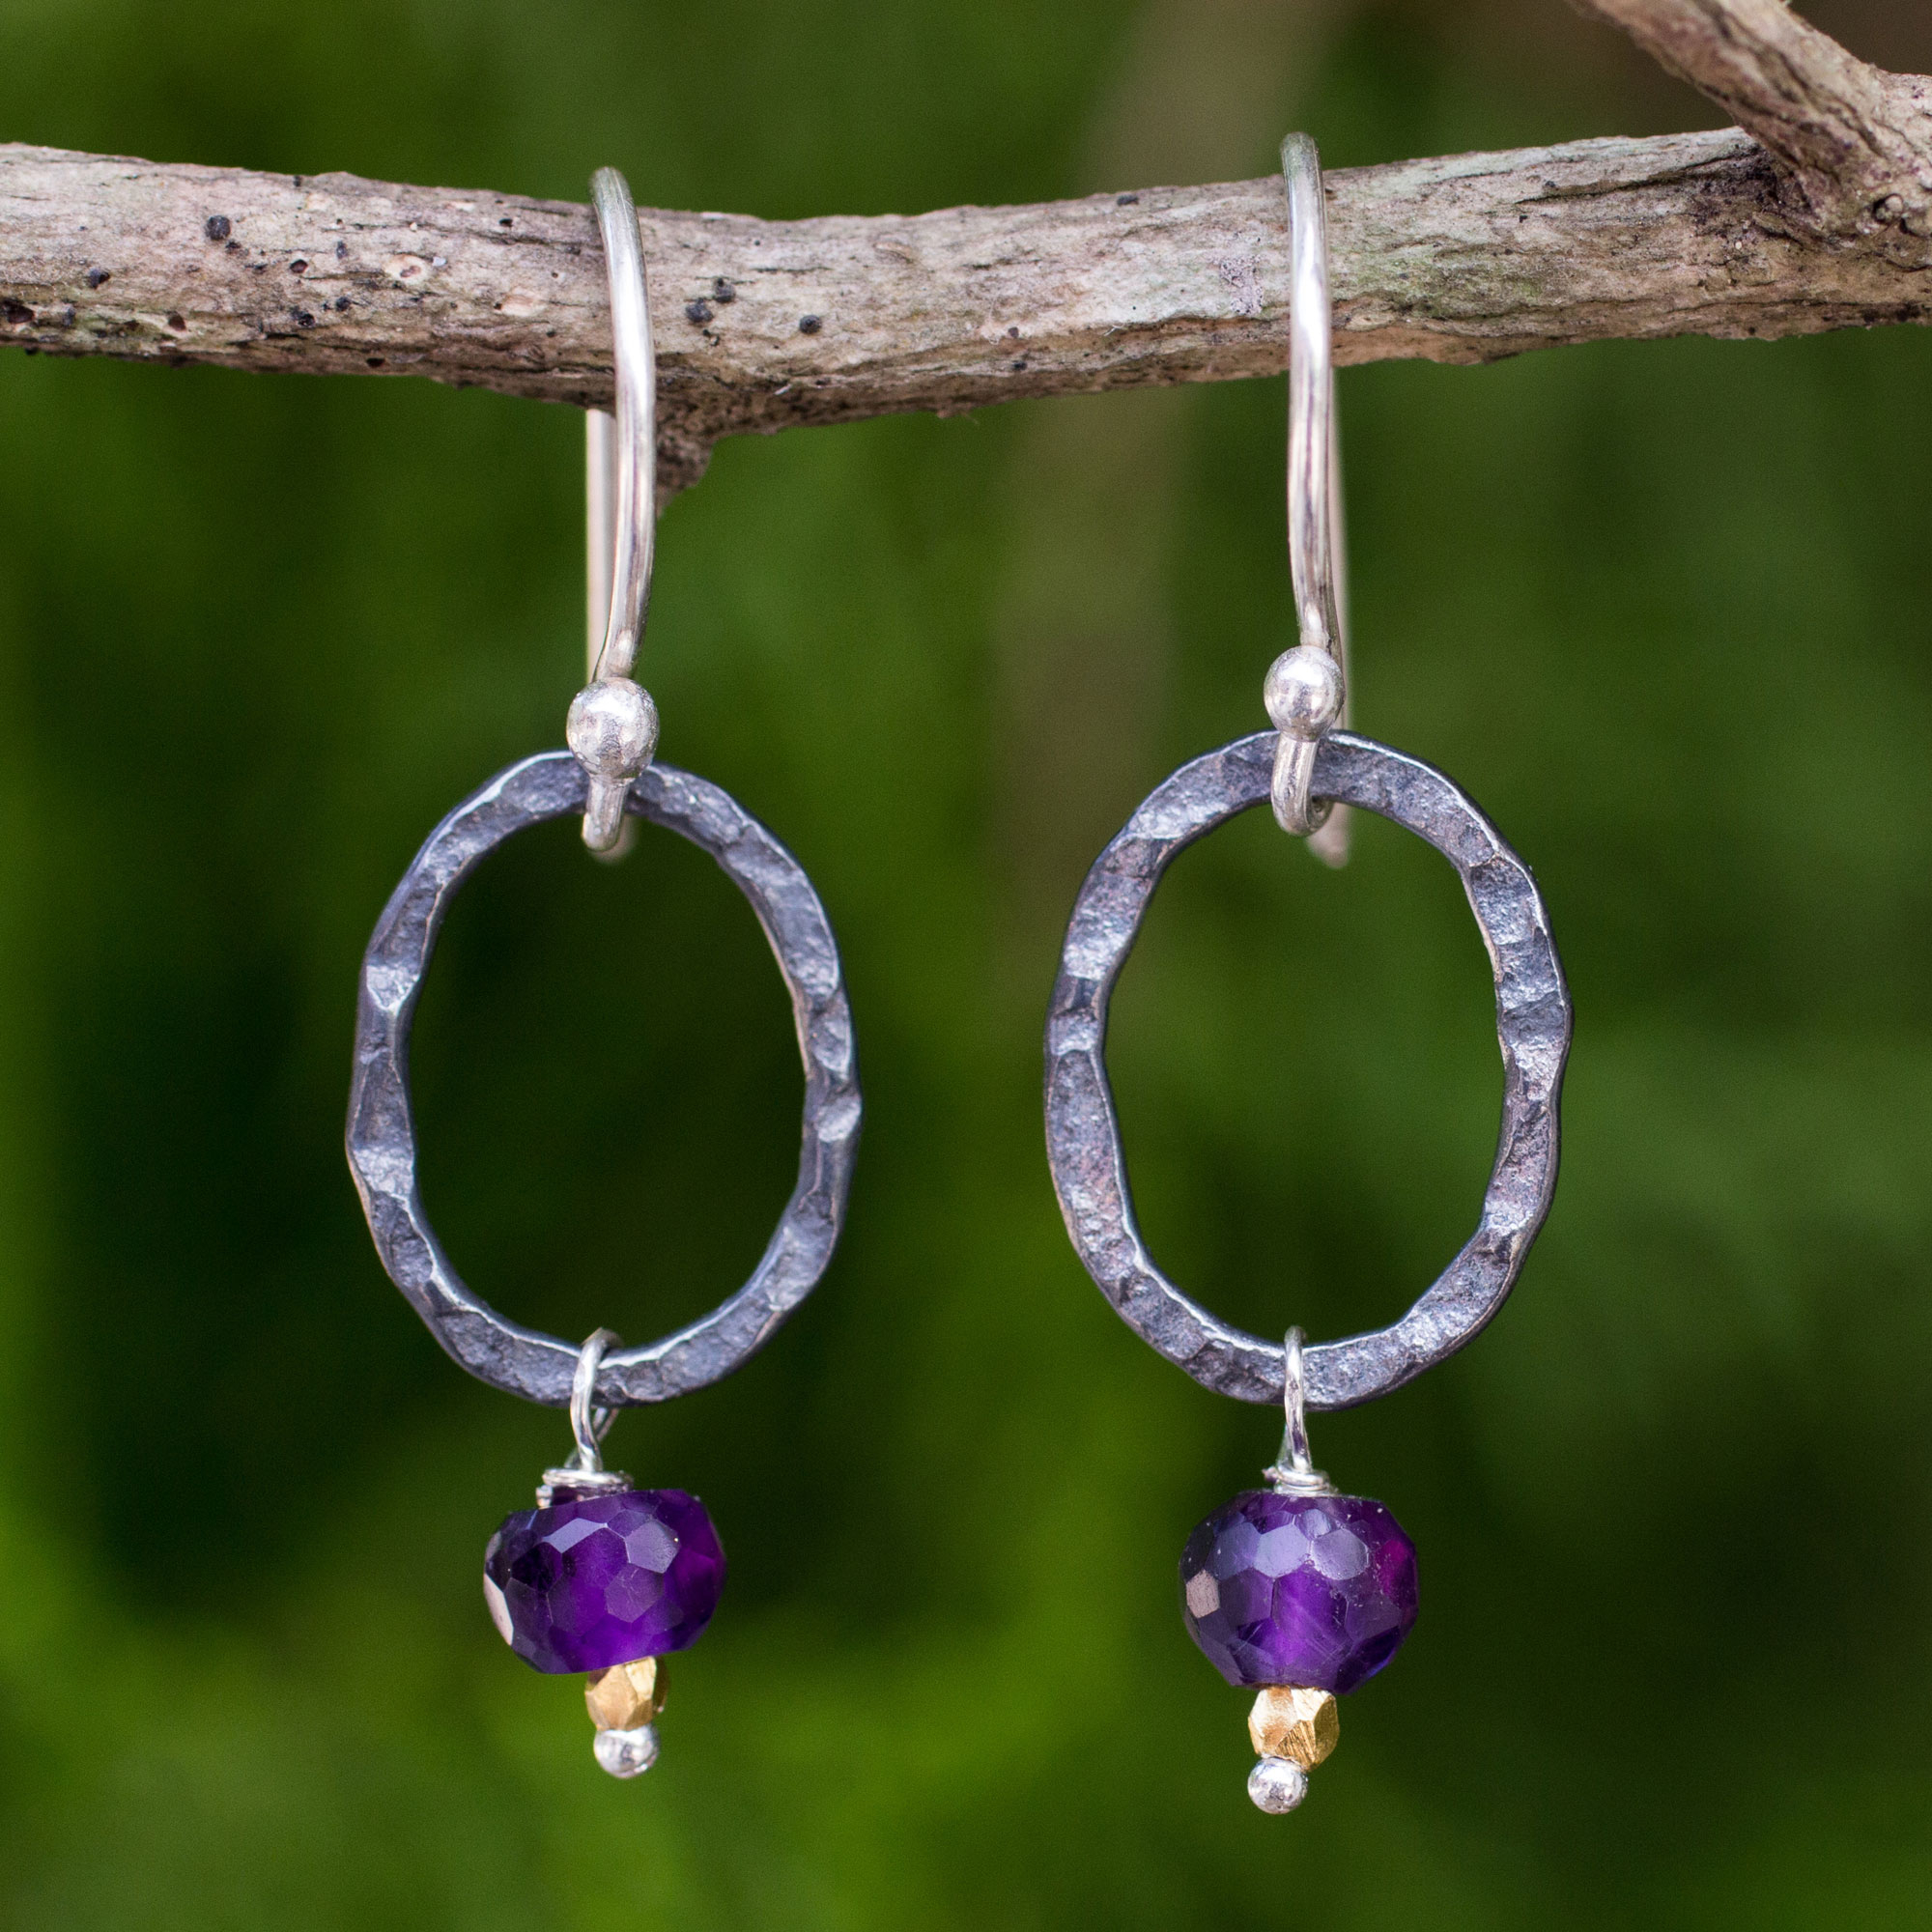 Hammered Small Hoop Earrings W/ Amethyst Charm 24k Gold over 925 Silve